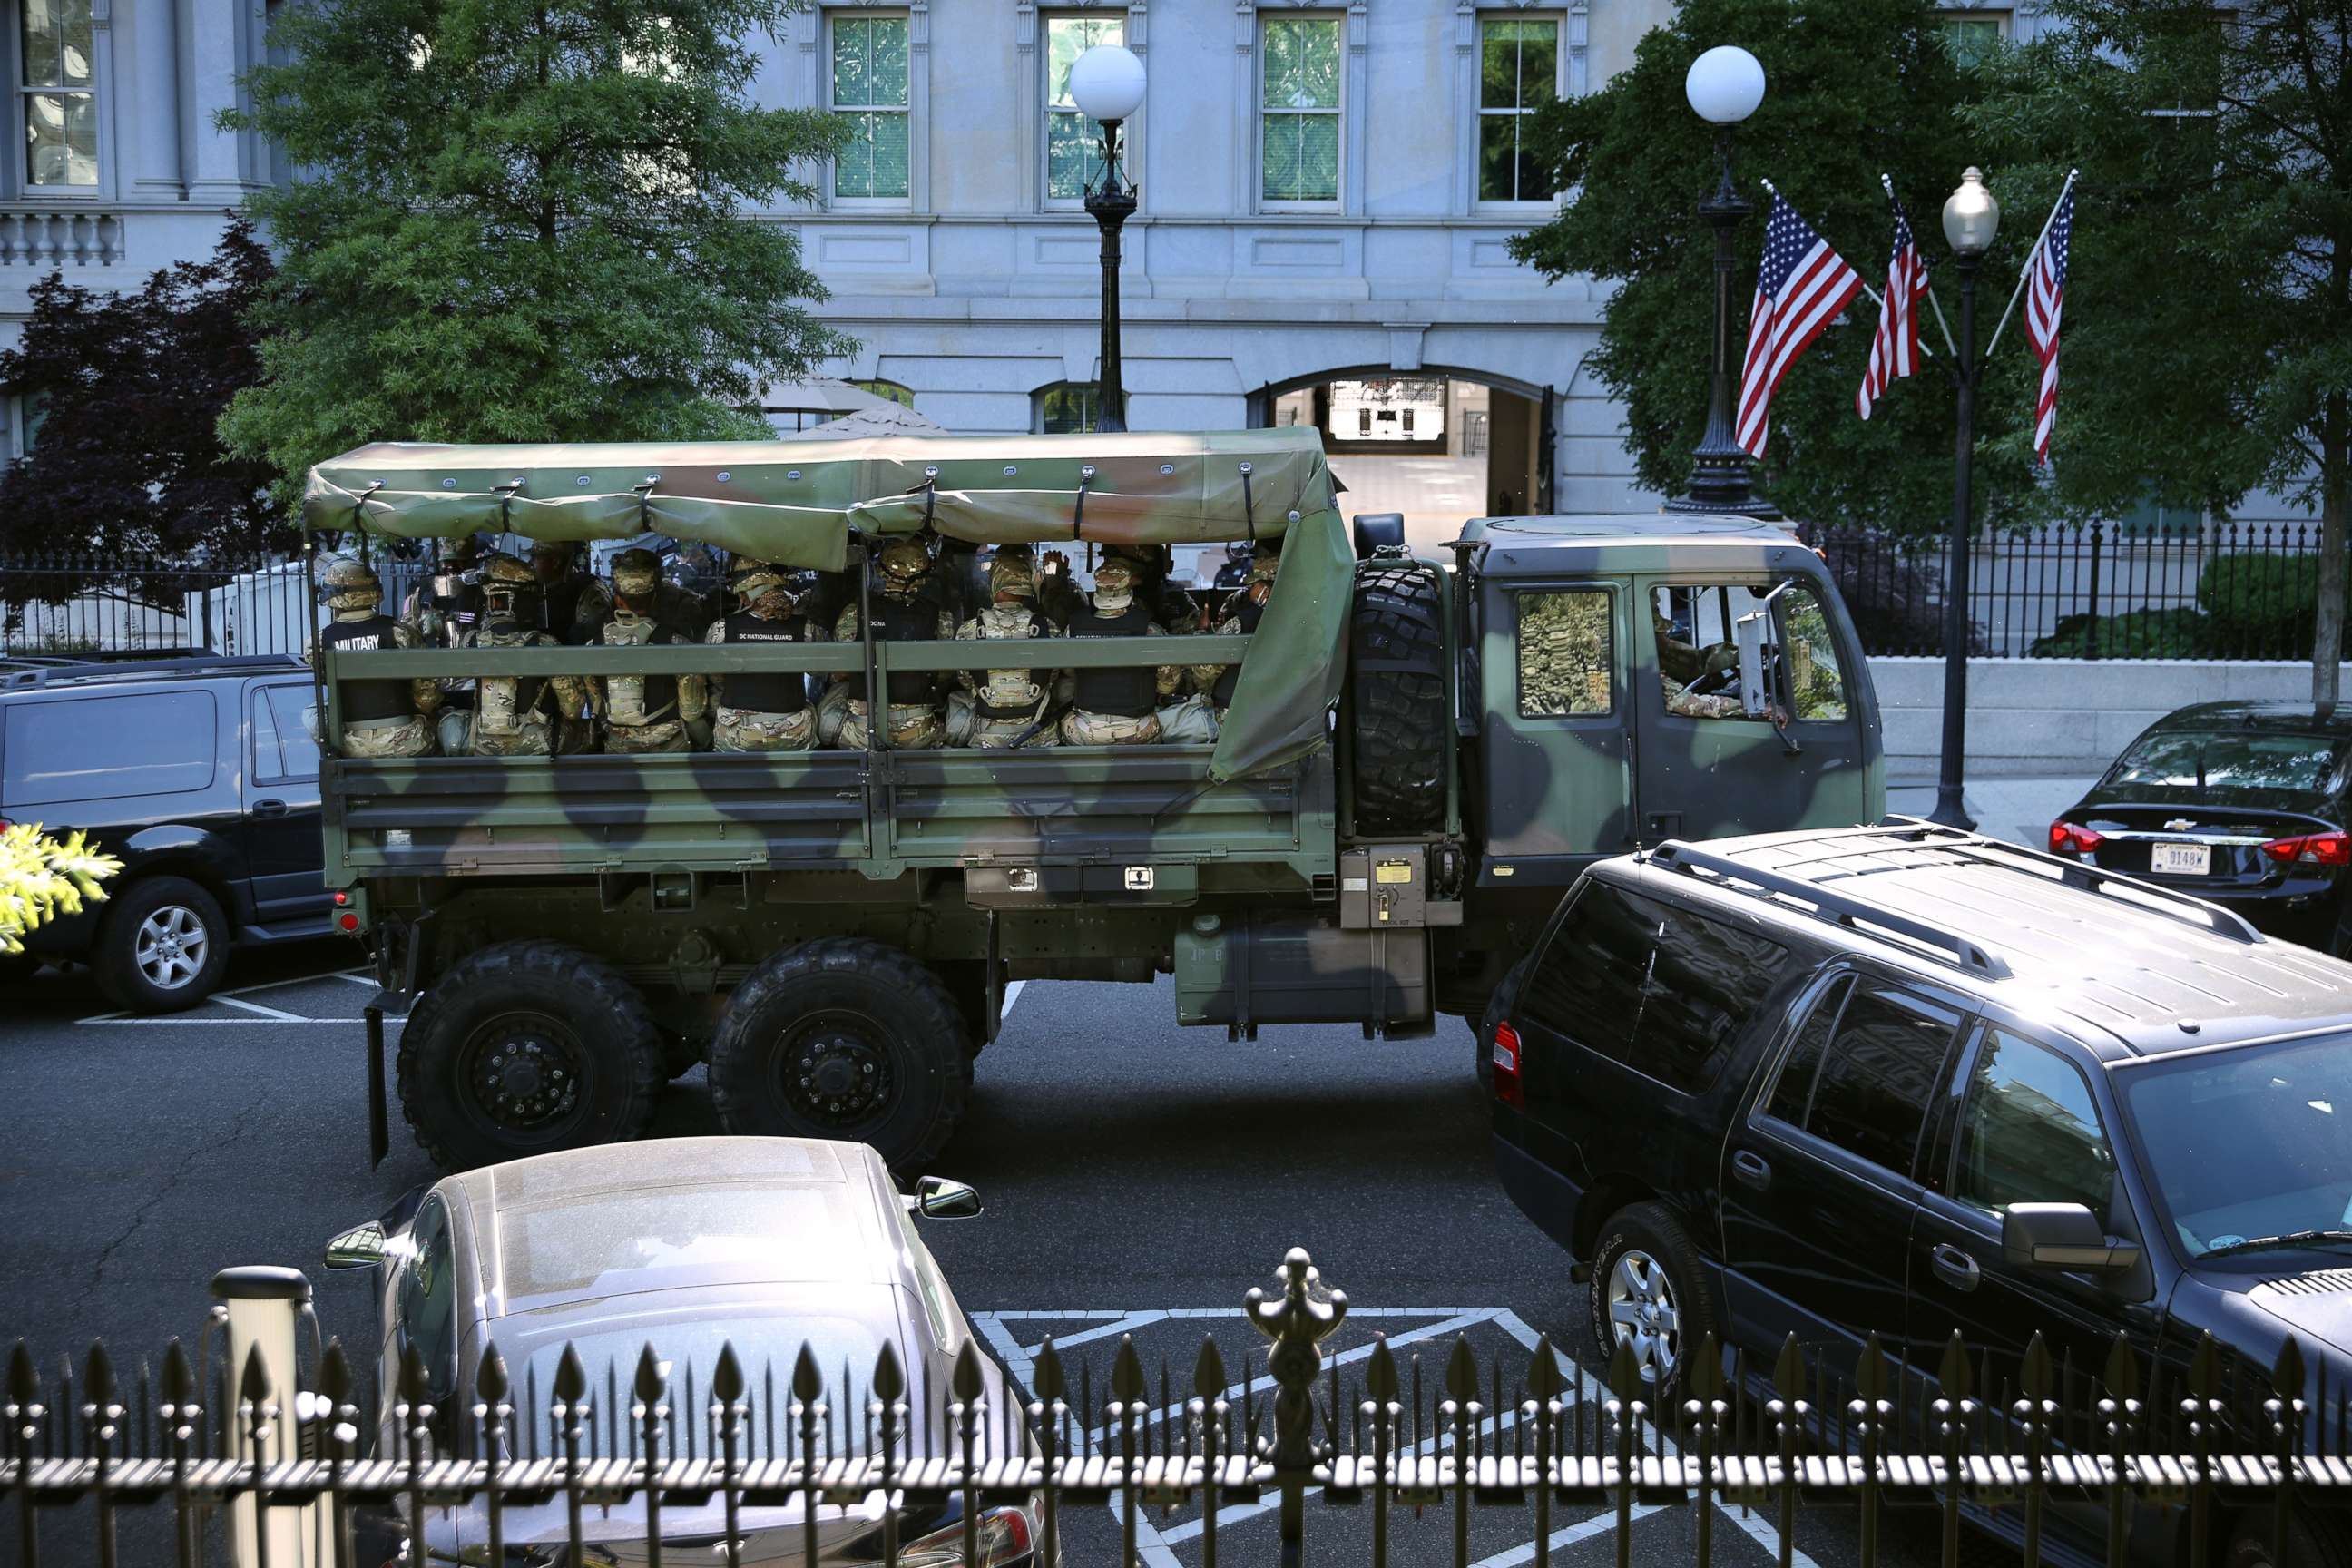 PHOTO: Trucks transport District of Columbia National Guard troops along West Executive Drive in support of law enforcement officers that are keeping demonstrators away from the White House, June 01, 2020, in Washington.